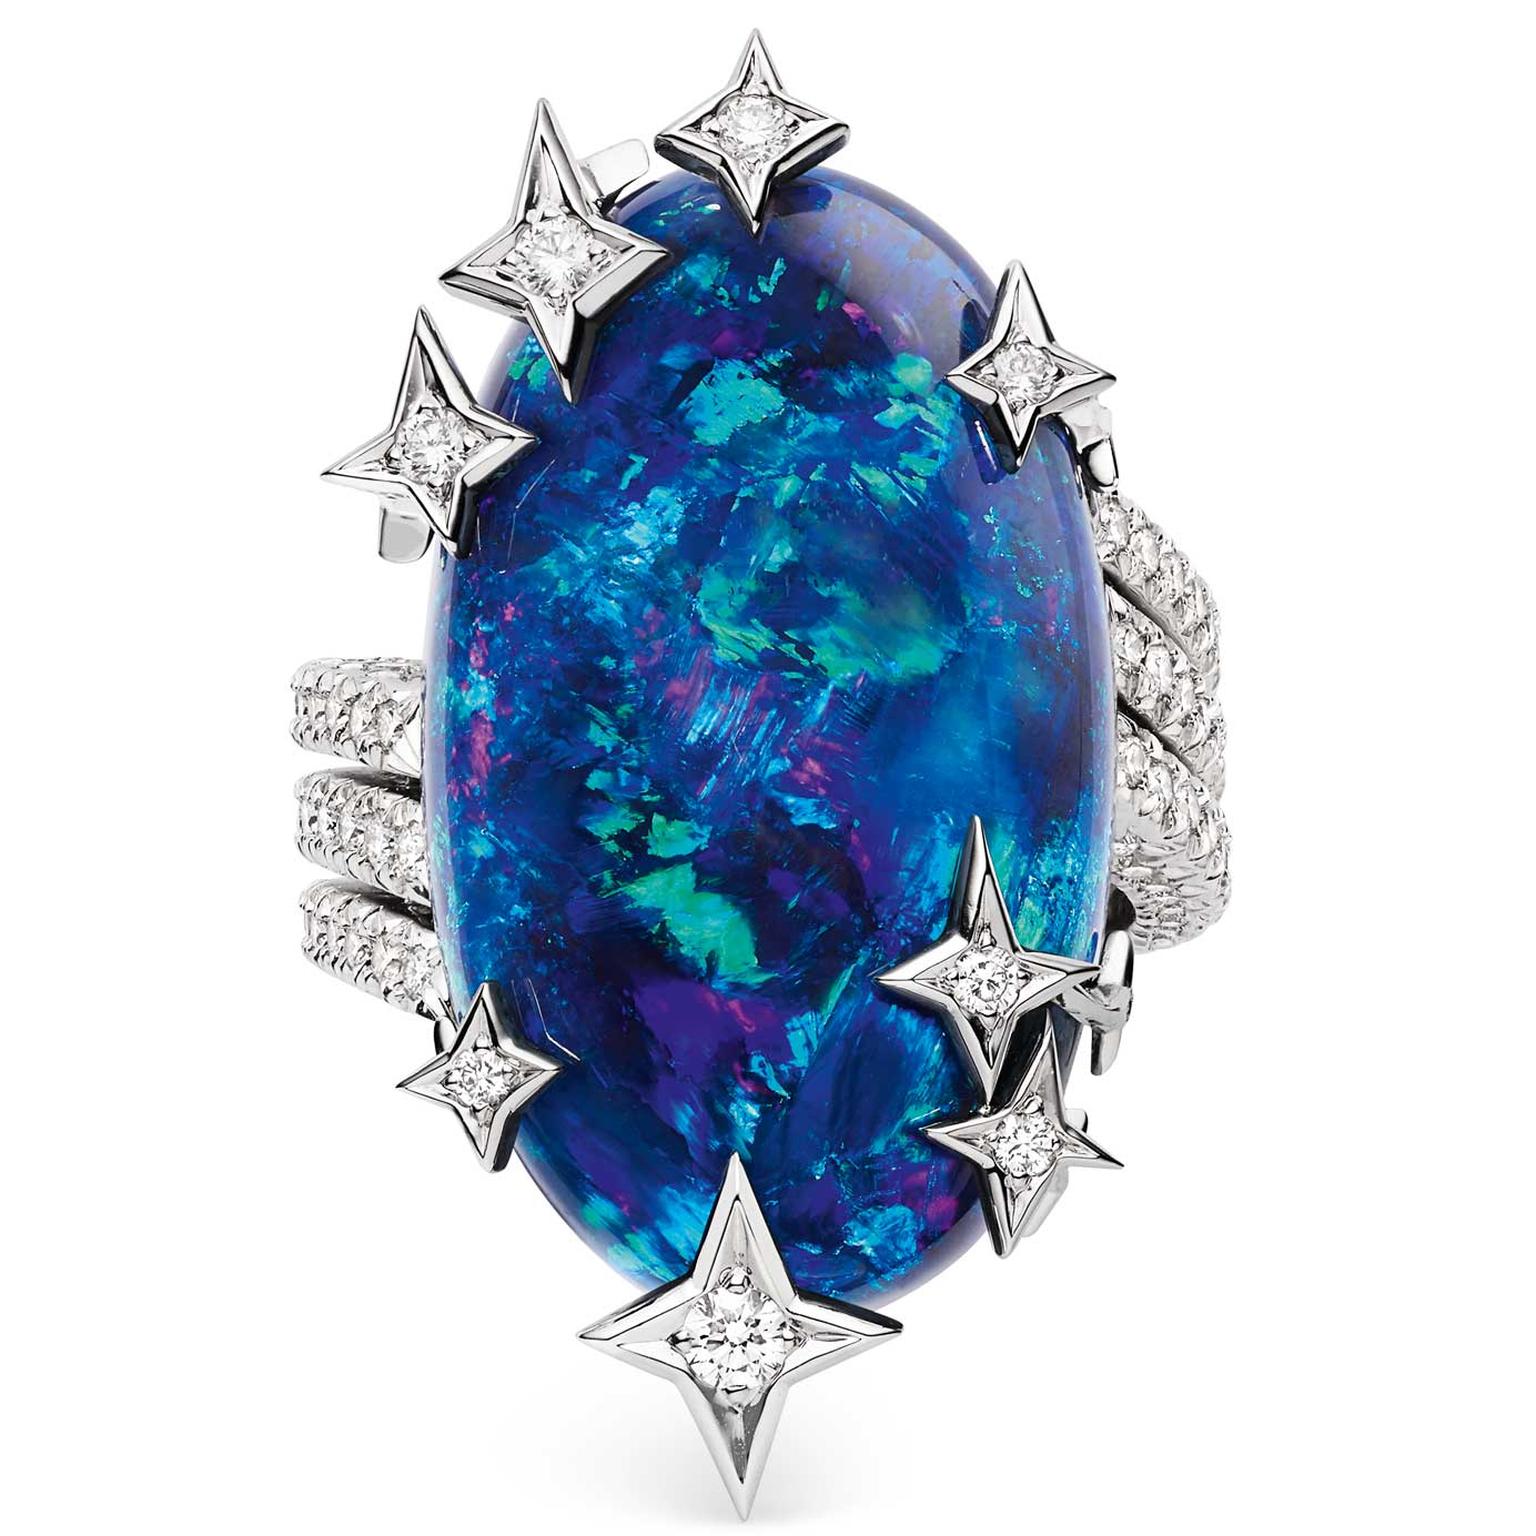 Chaumet's new high jewellery reaches for the stars